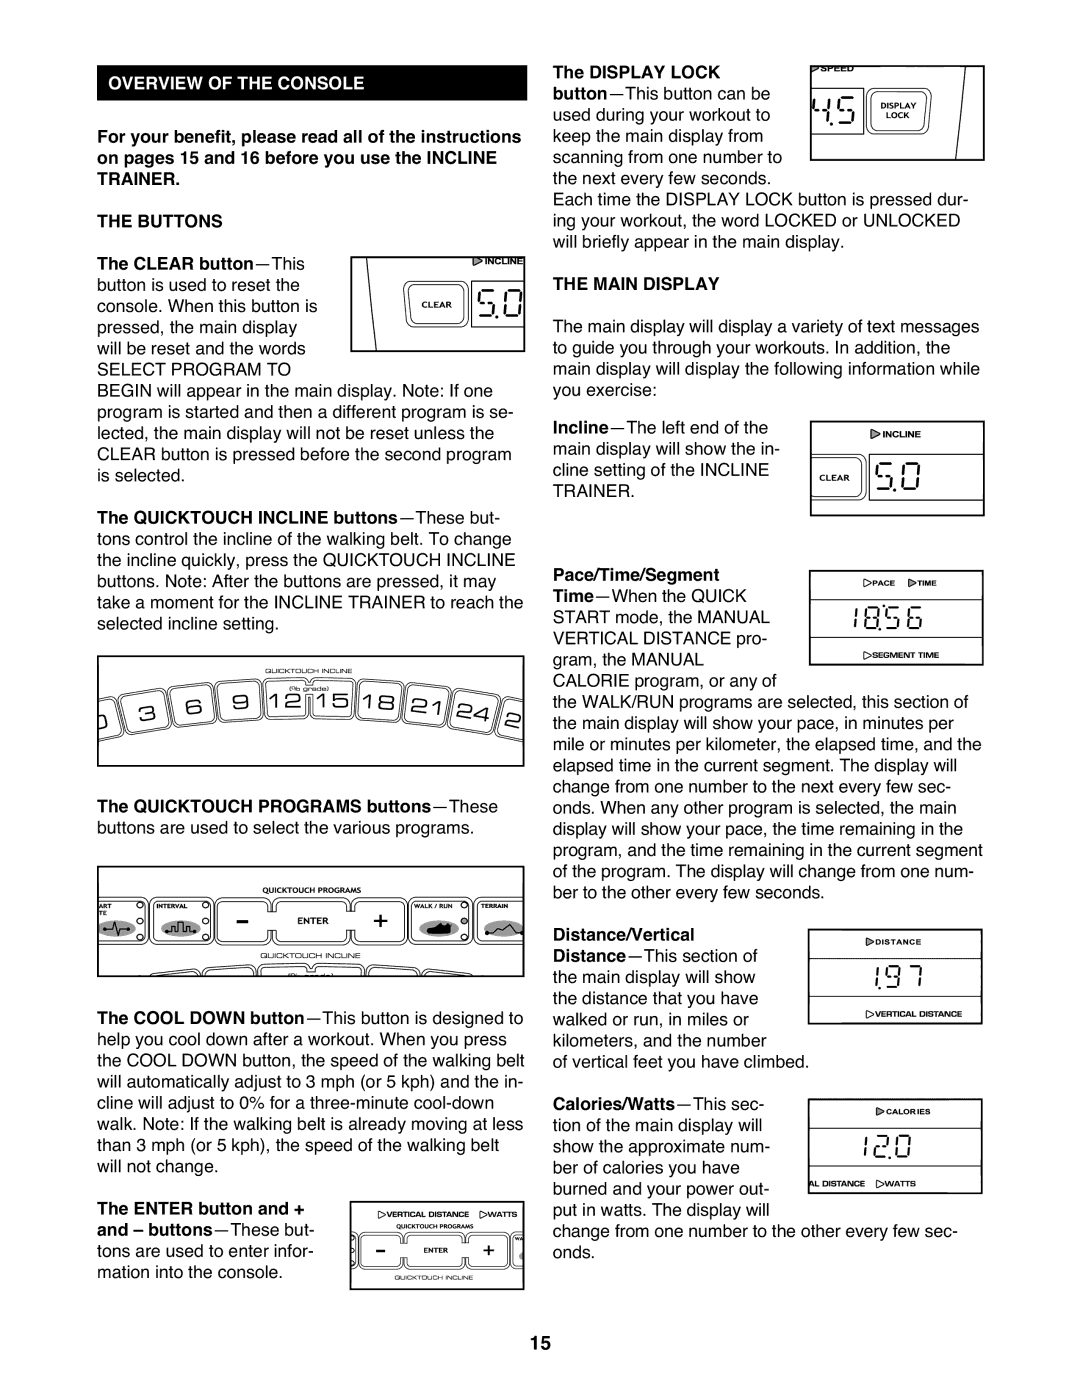 NordicTrack None user manual Overview of the Console, Buttons, Main Display 